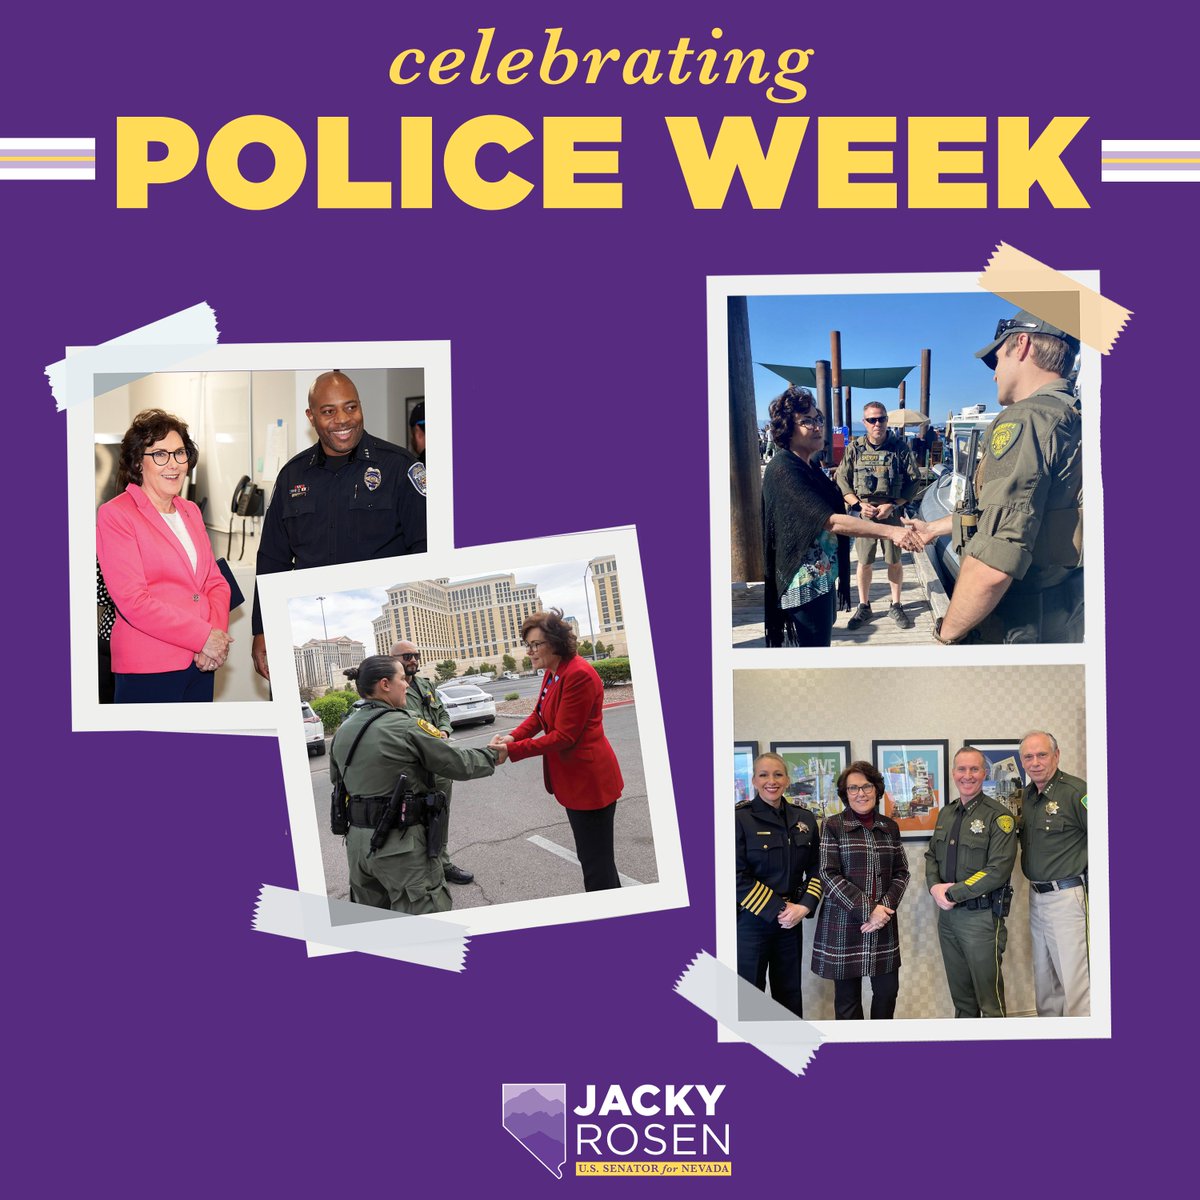 This #PoliceWeek, I want to recognize and honor Nevada's brave law enforcement officers who showcase selflessness, courage, and a deep commitment to public safety every day.